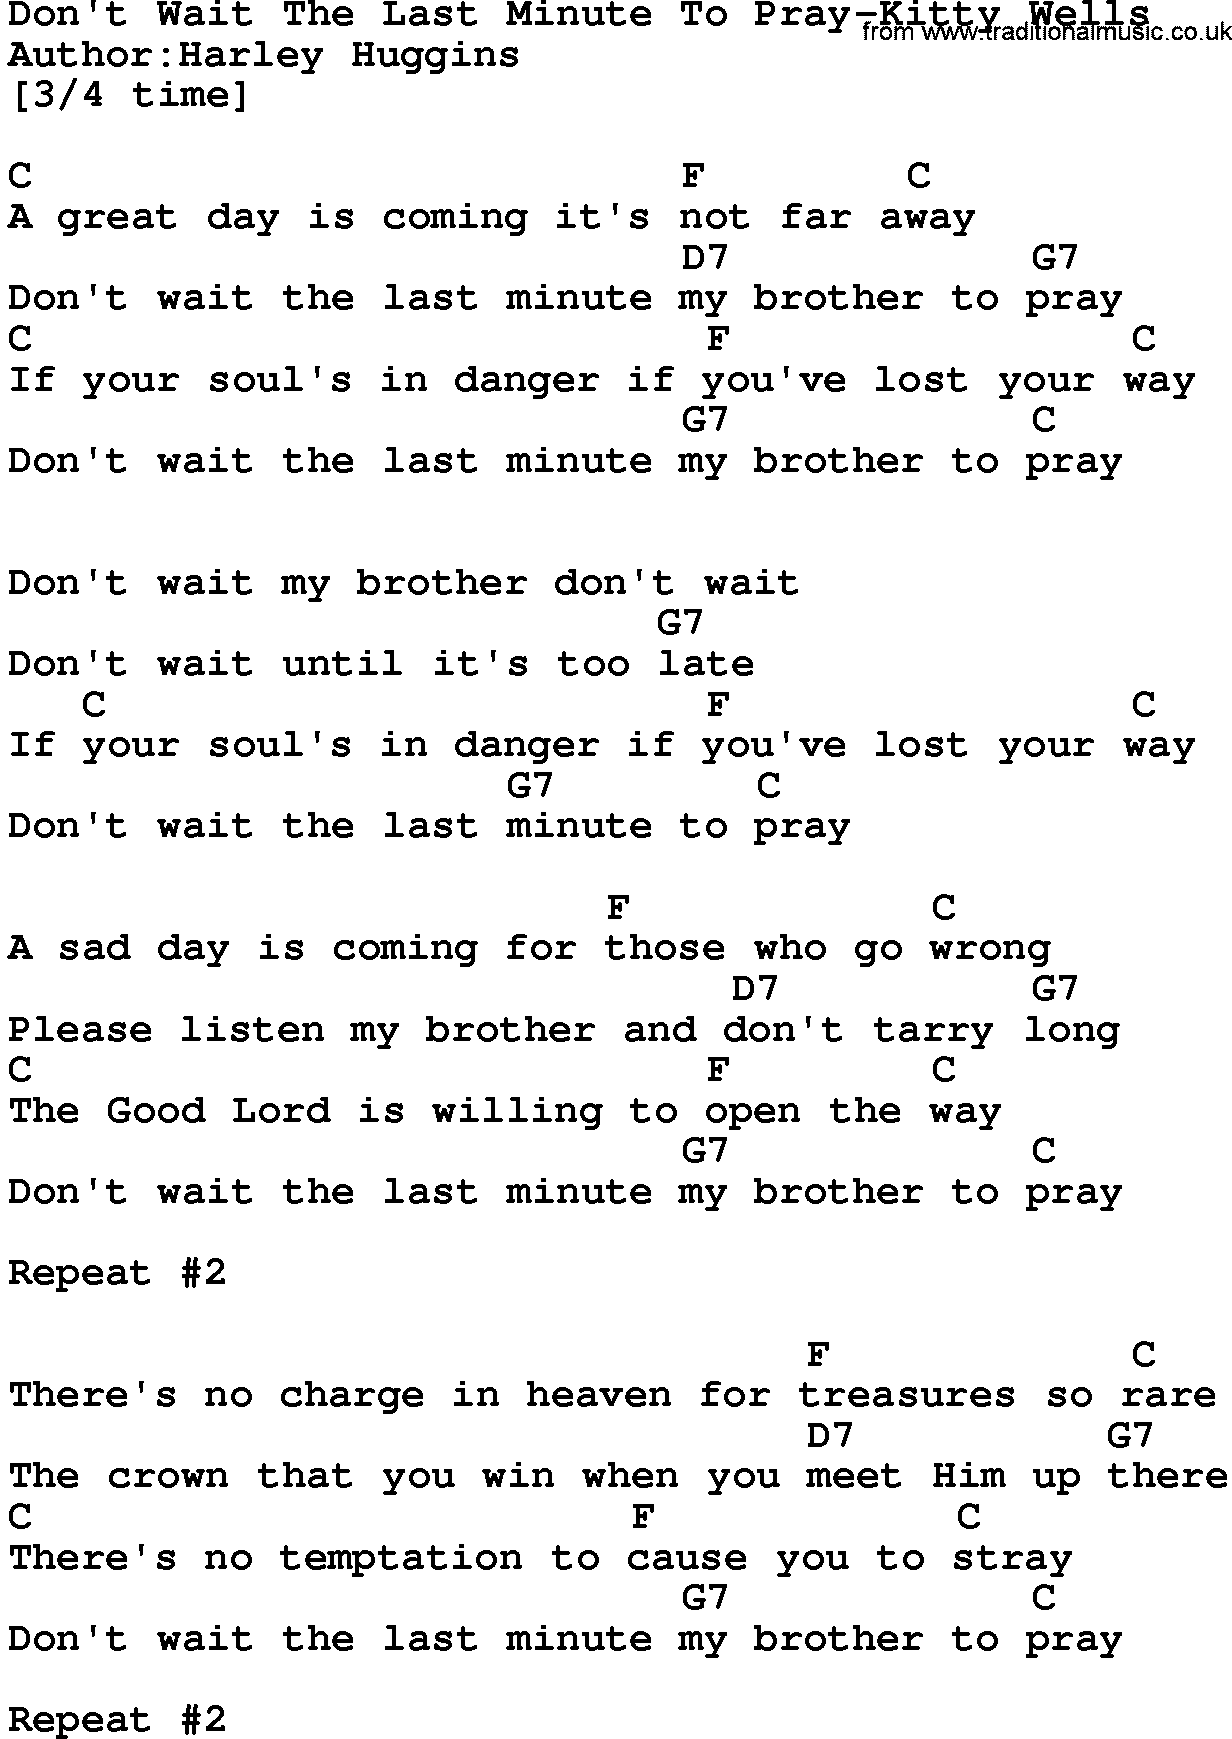 Country music song: Don't Wait The Last Minute To Pray-Kitty Wells lyrics and chords